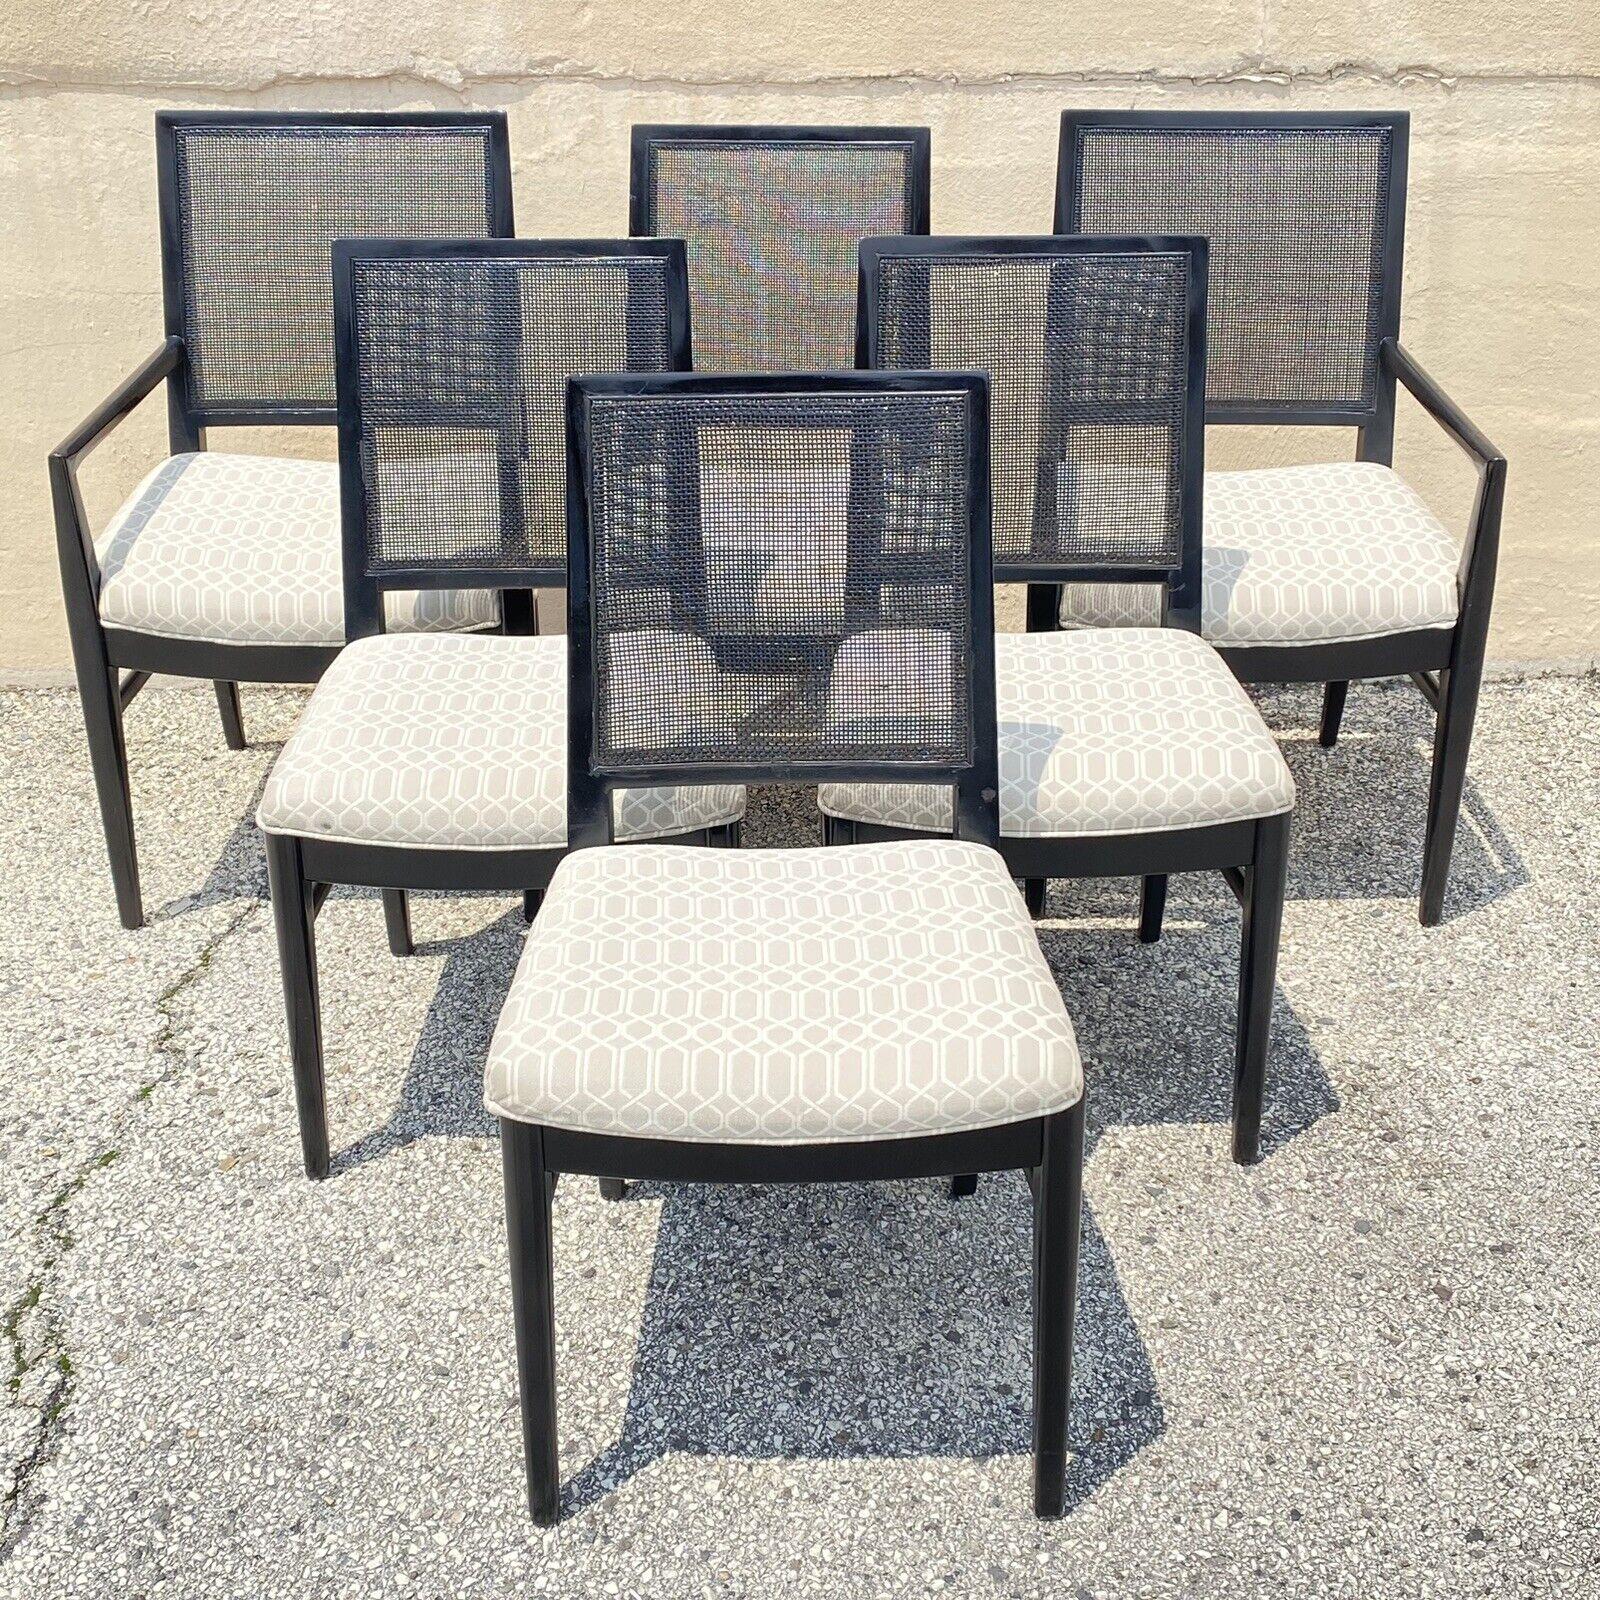 Vintage Mid Century Modern Paul McCobb Style Black Cane Dining Chairs - Set of 6 7